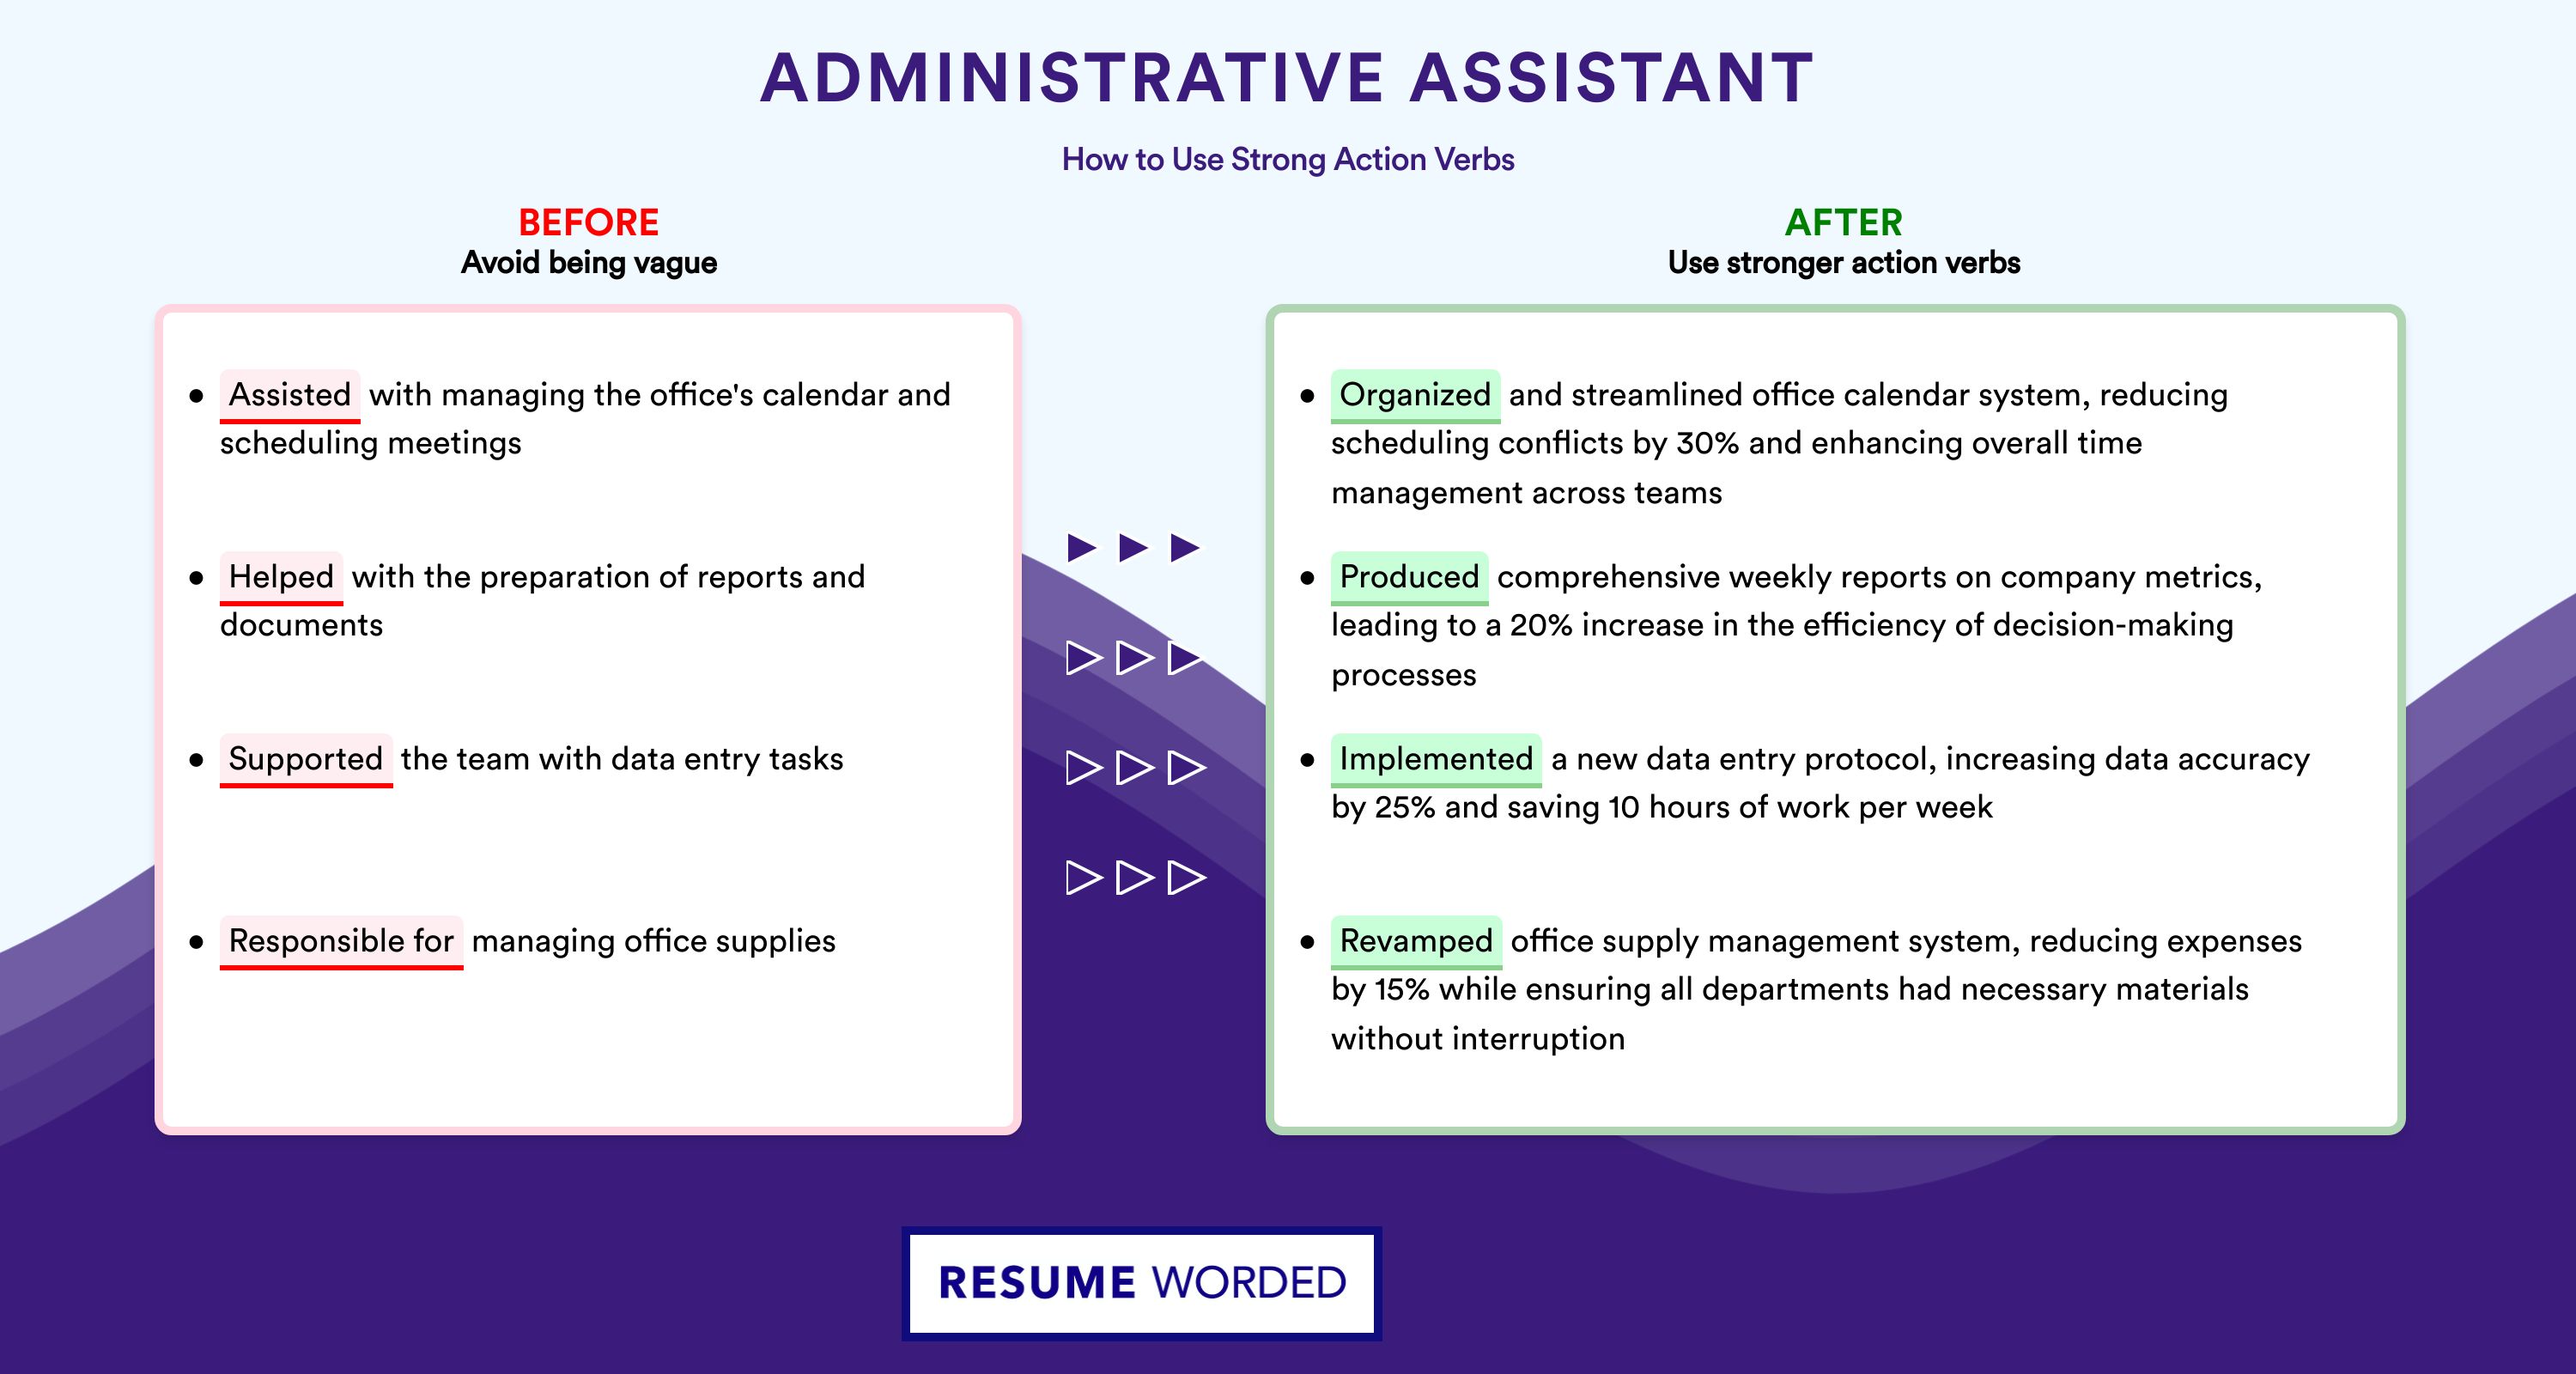 Action Verbs for Administrative Assistant